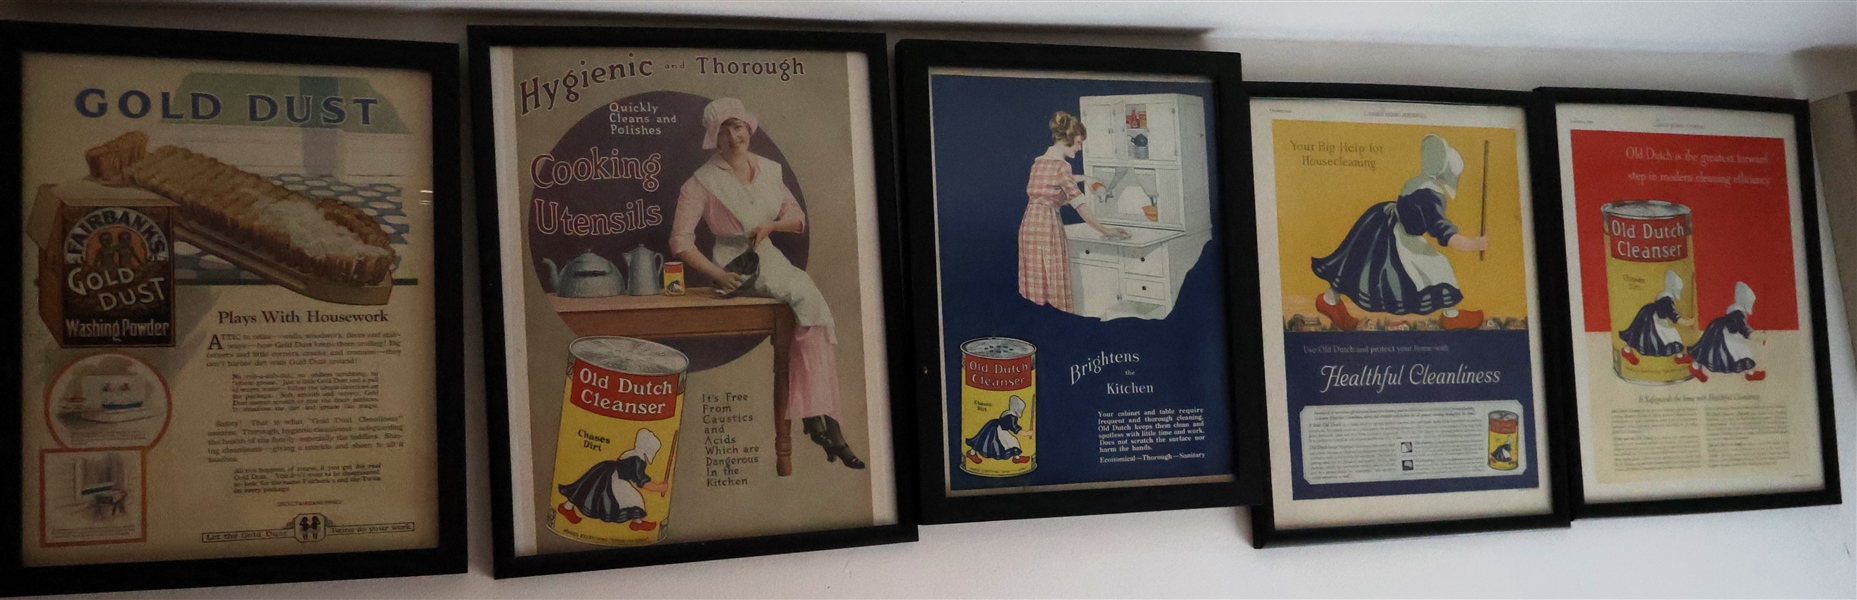 5 - Framed Advertisements for Gold Dust and Old Dutch Cleaning Products - Each Frame Measures 14" by 12" 